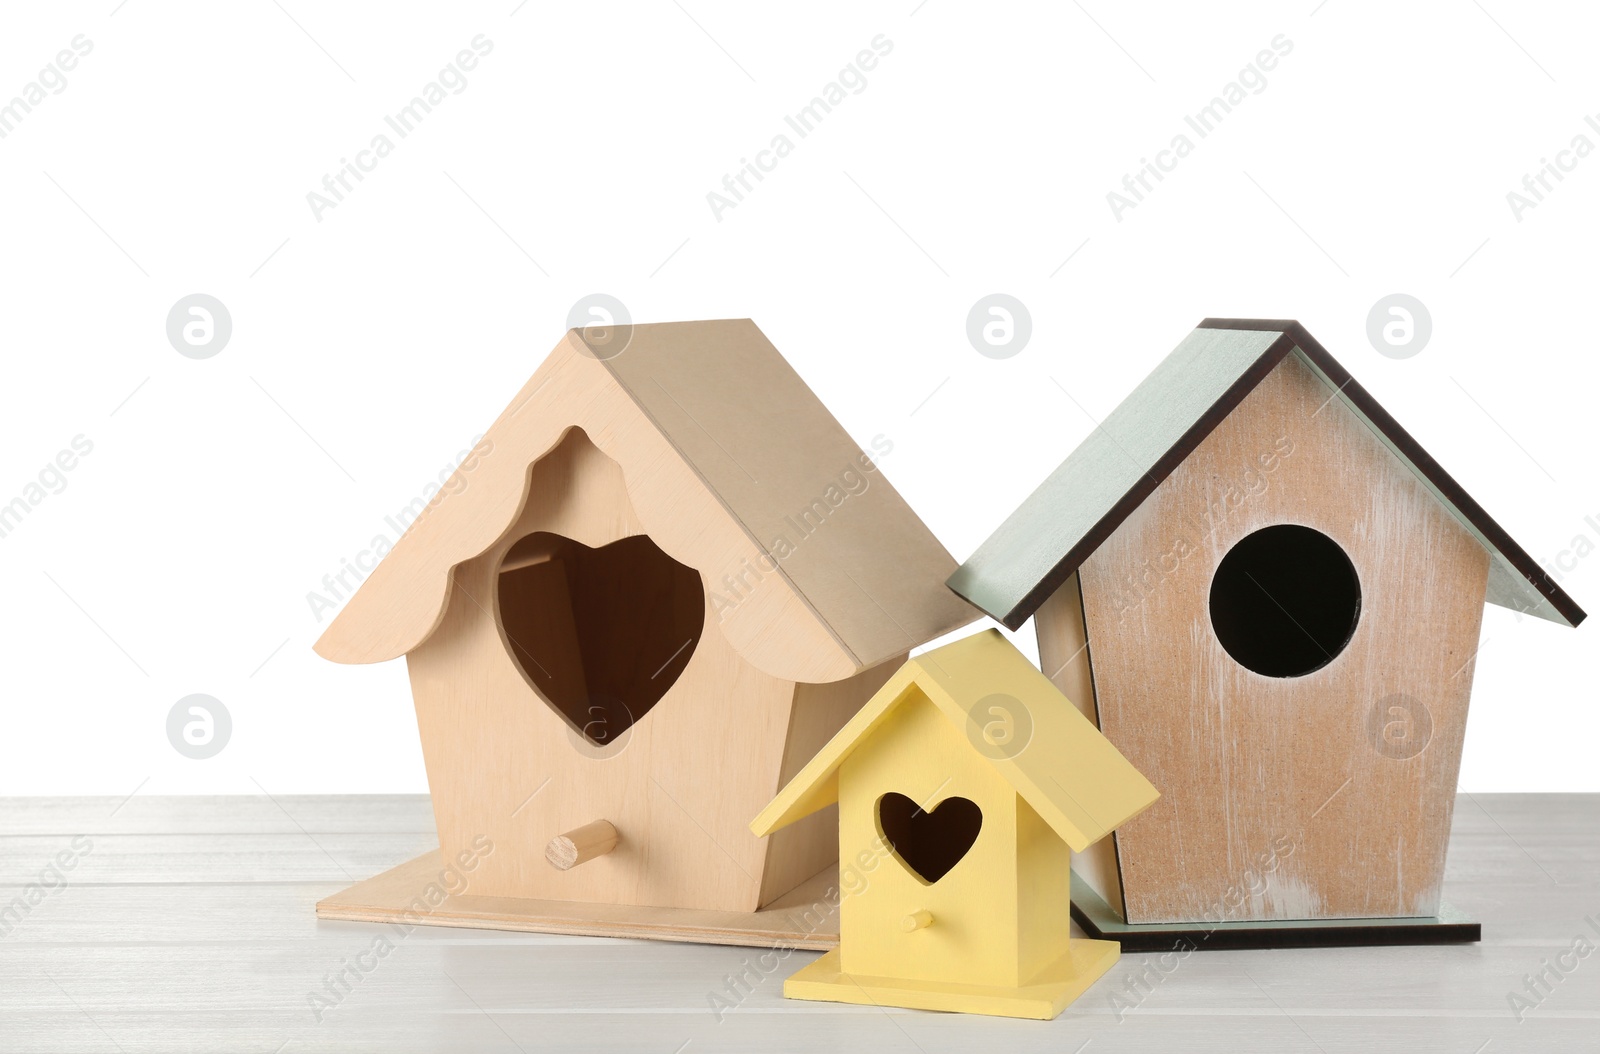 Photo of Three different bird houses on white background